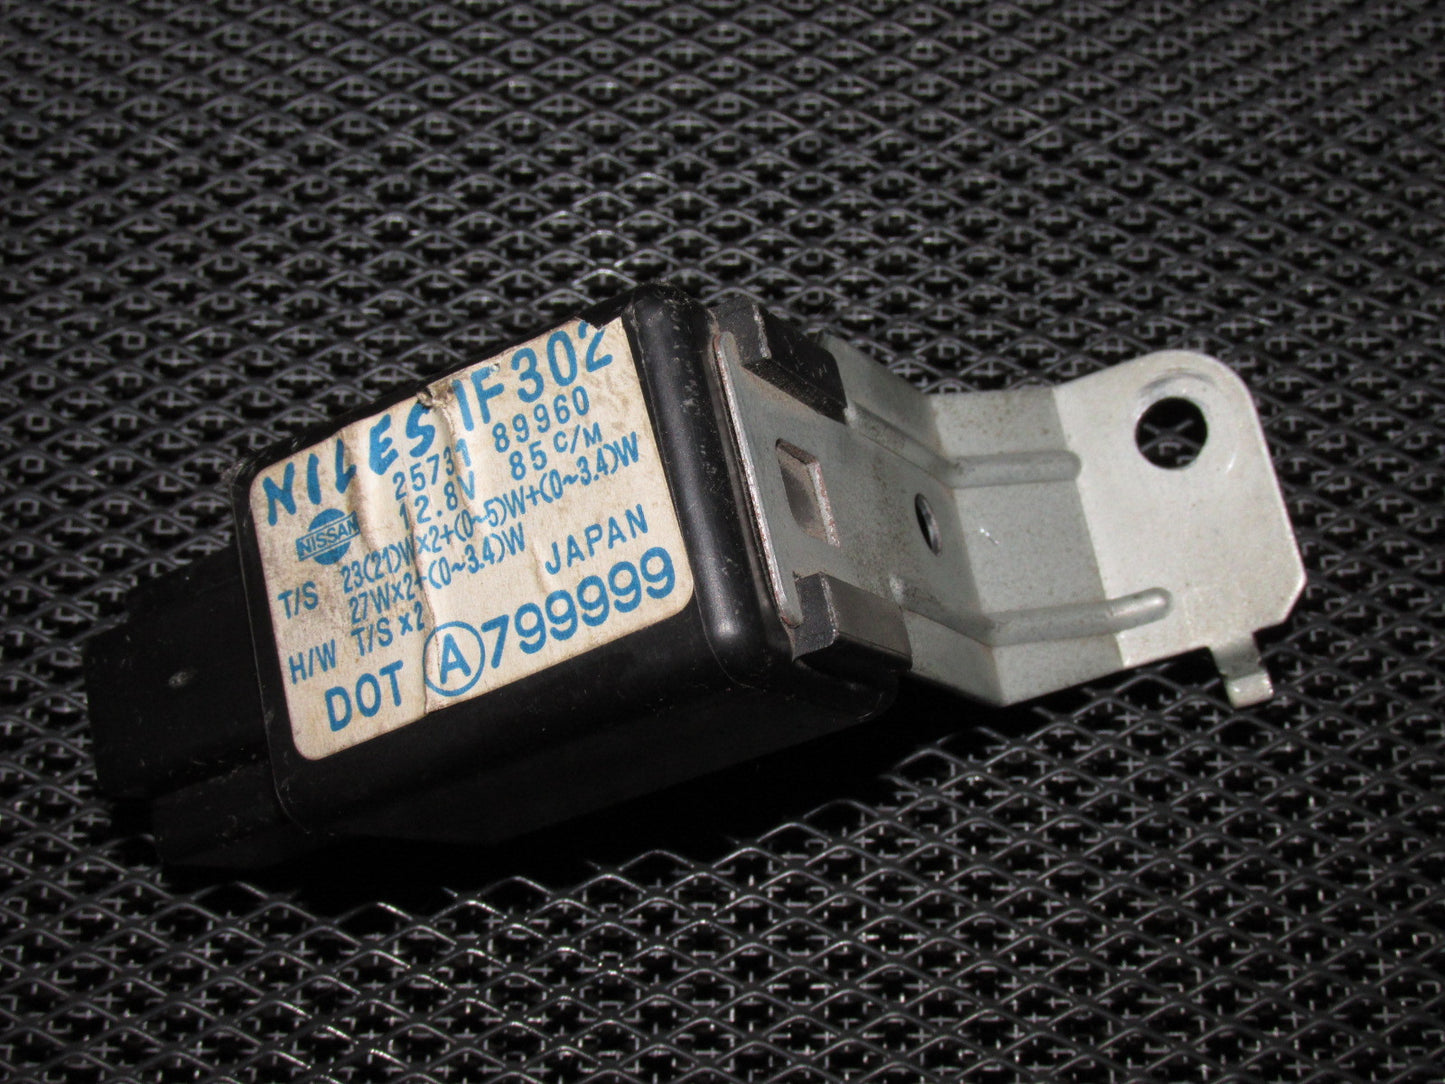 90 91 92 93 94 95 96 Nissan 300zx OEM Flasher Unit Relay - 25731-89960